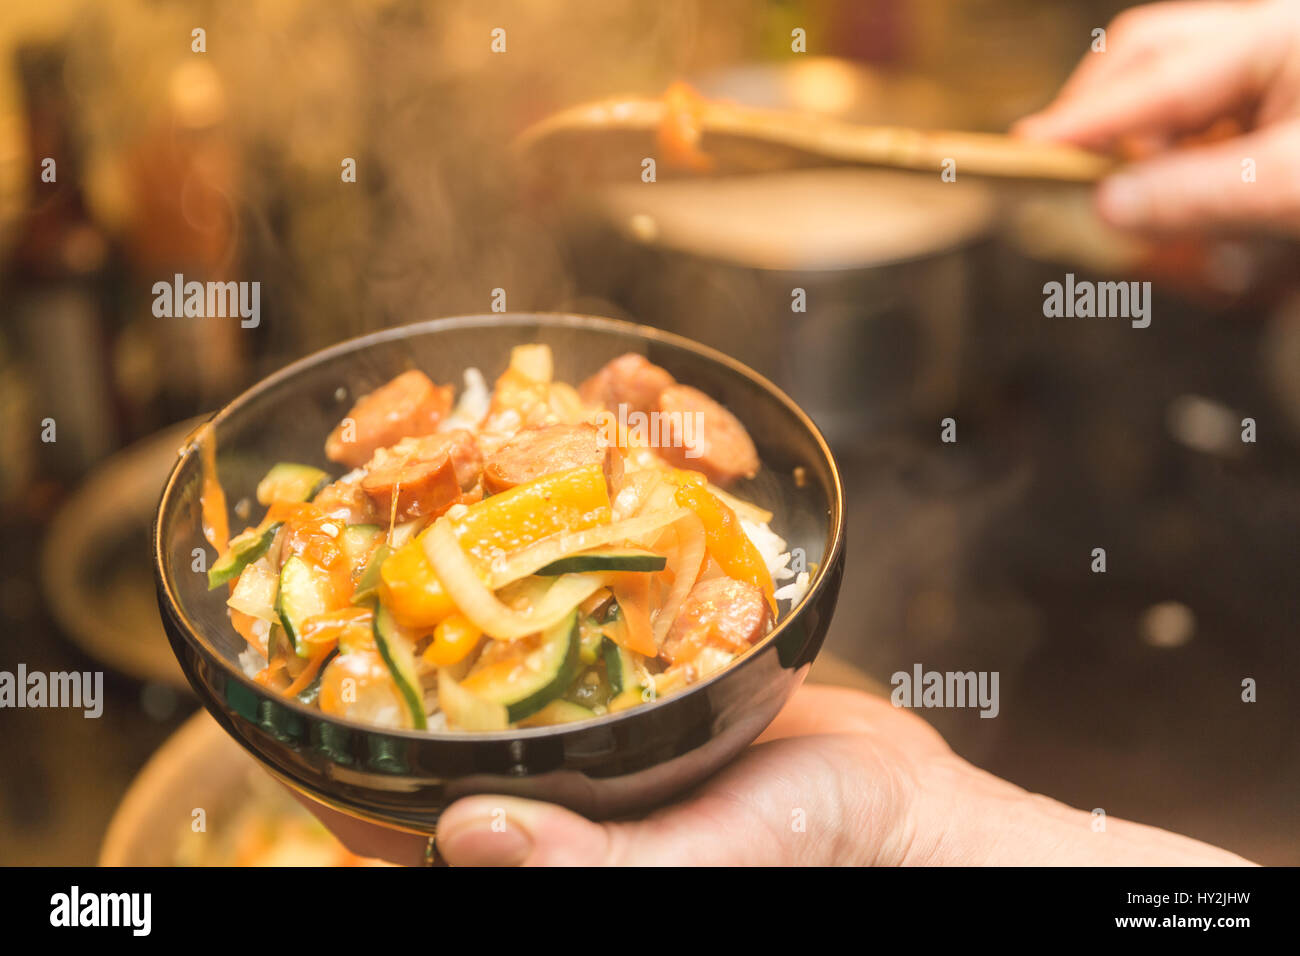 Rice, vegetables, and meat in freshly cooked meal. Stock Photo